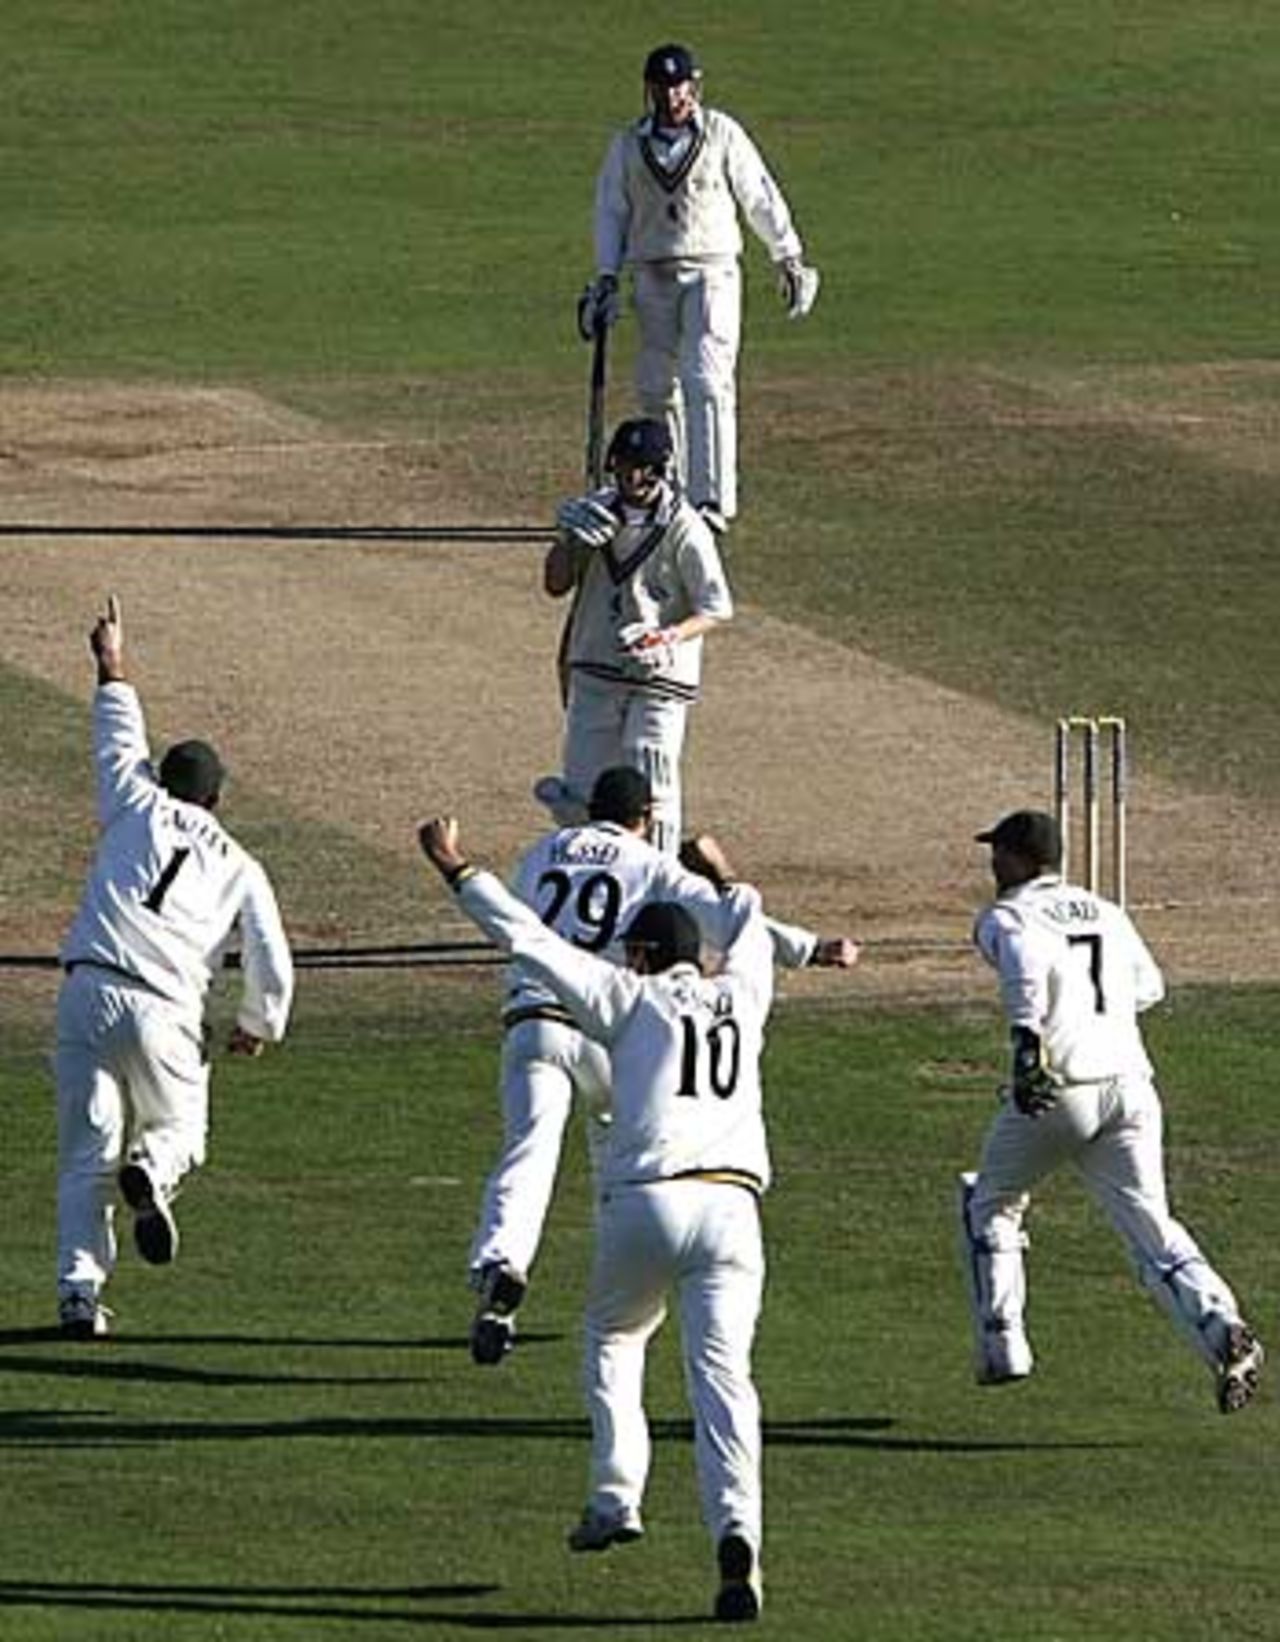 The long wait is over: Notts players celebrate the final wicket against Kent, as they became County Champions for the first time since 1987, Kent v Notts, Canterbury, September 17, 2005